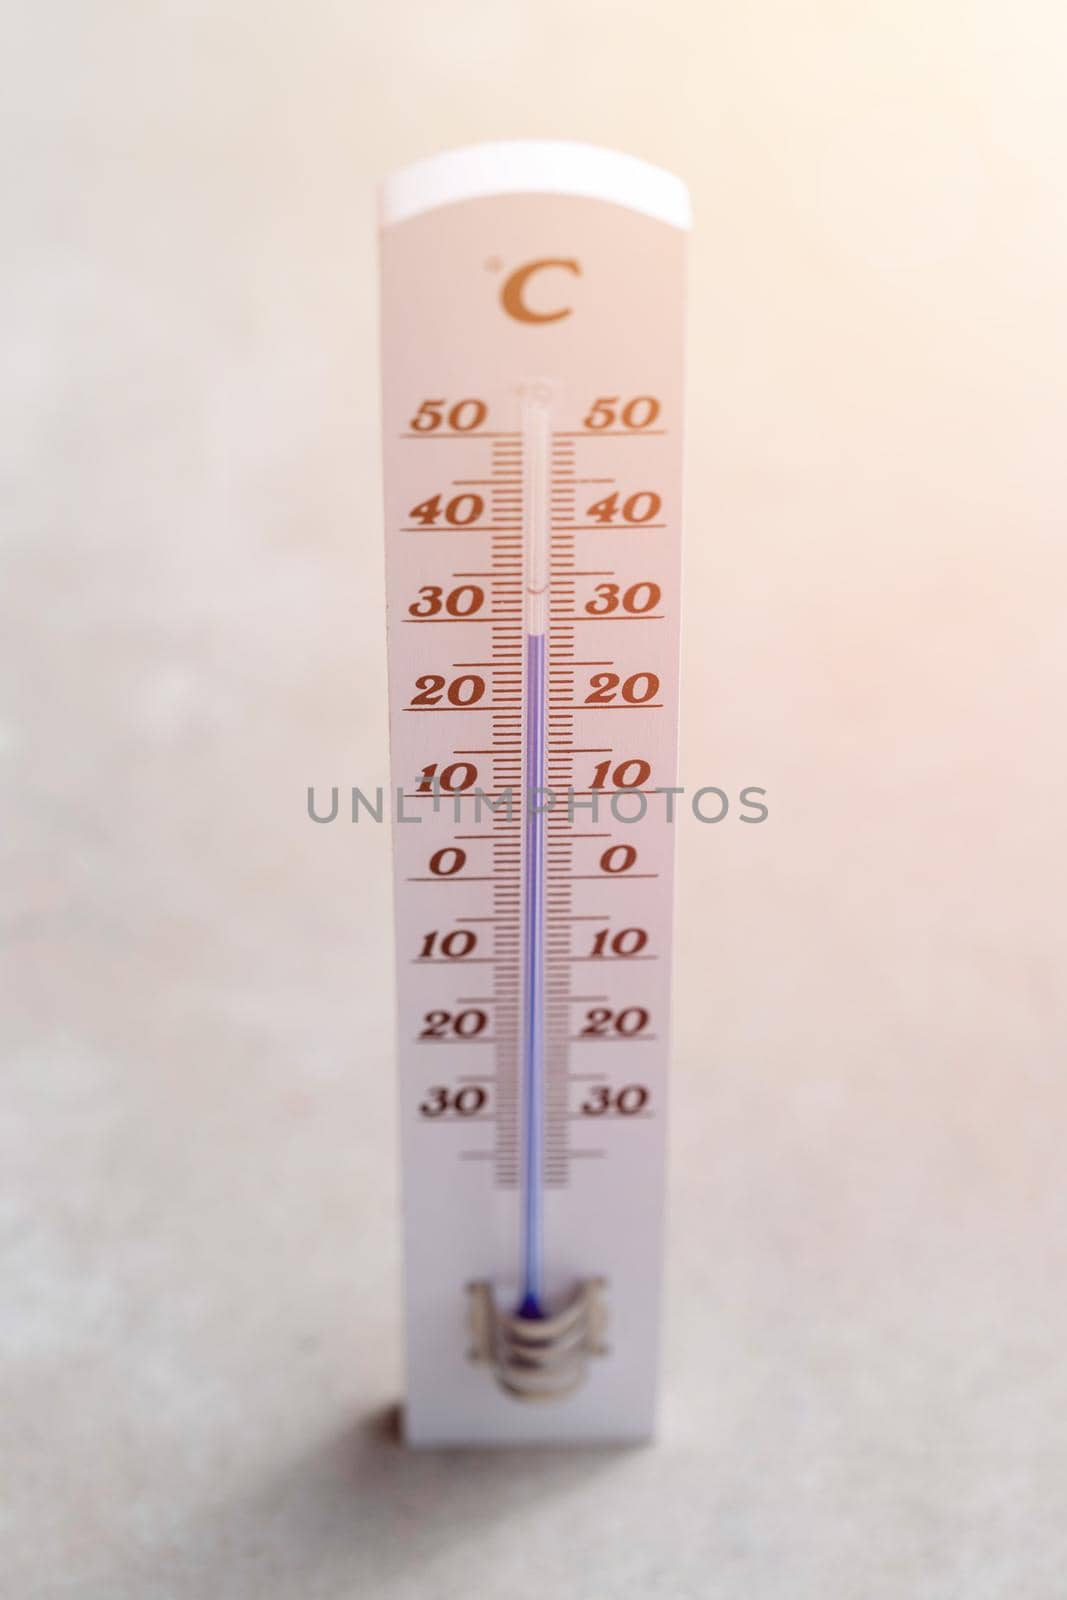 Heatwave: Thermometer lying on the concrete floor by Daxenbichler